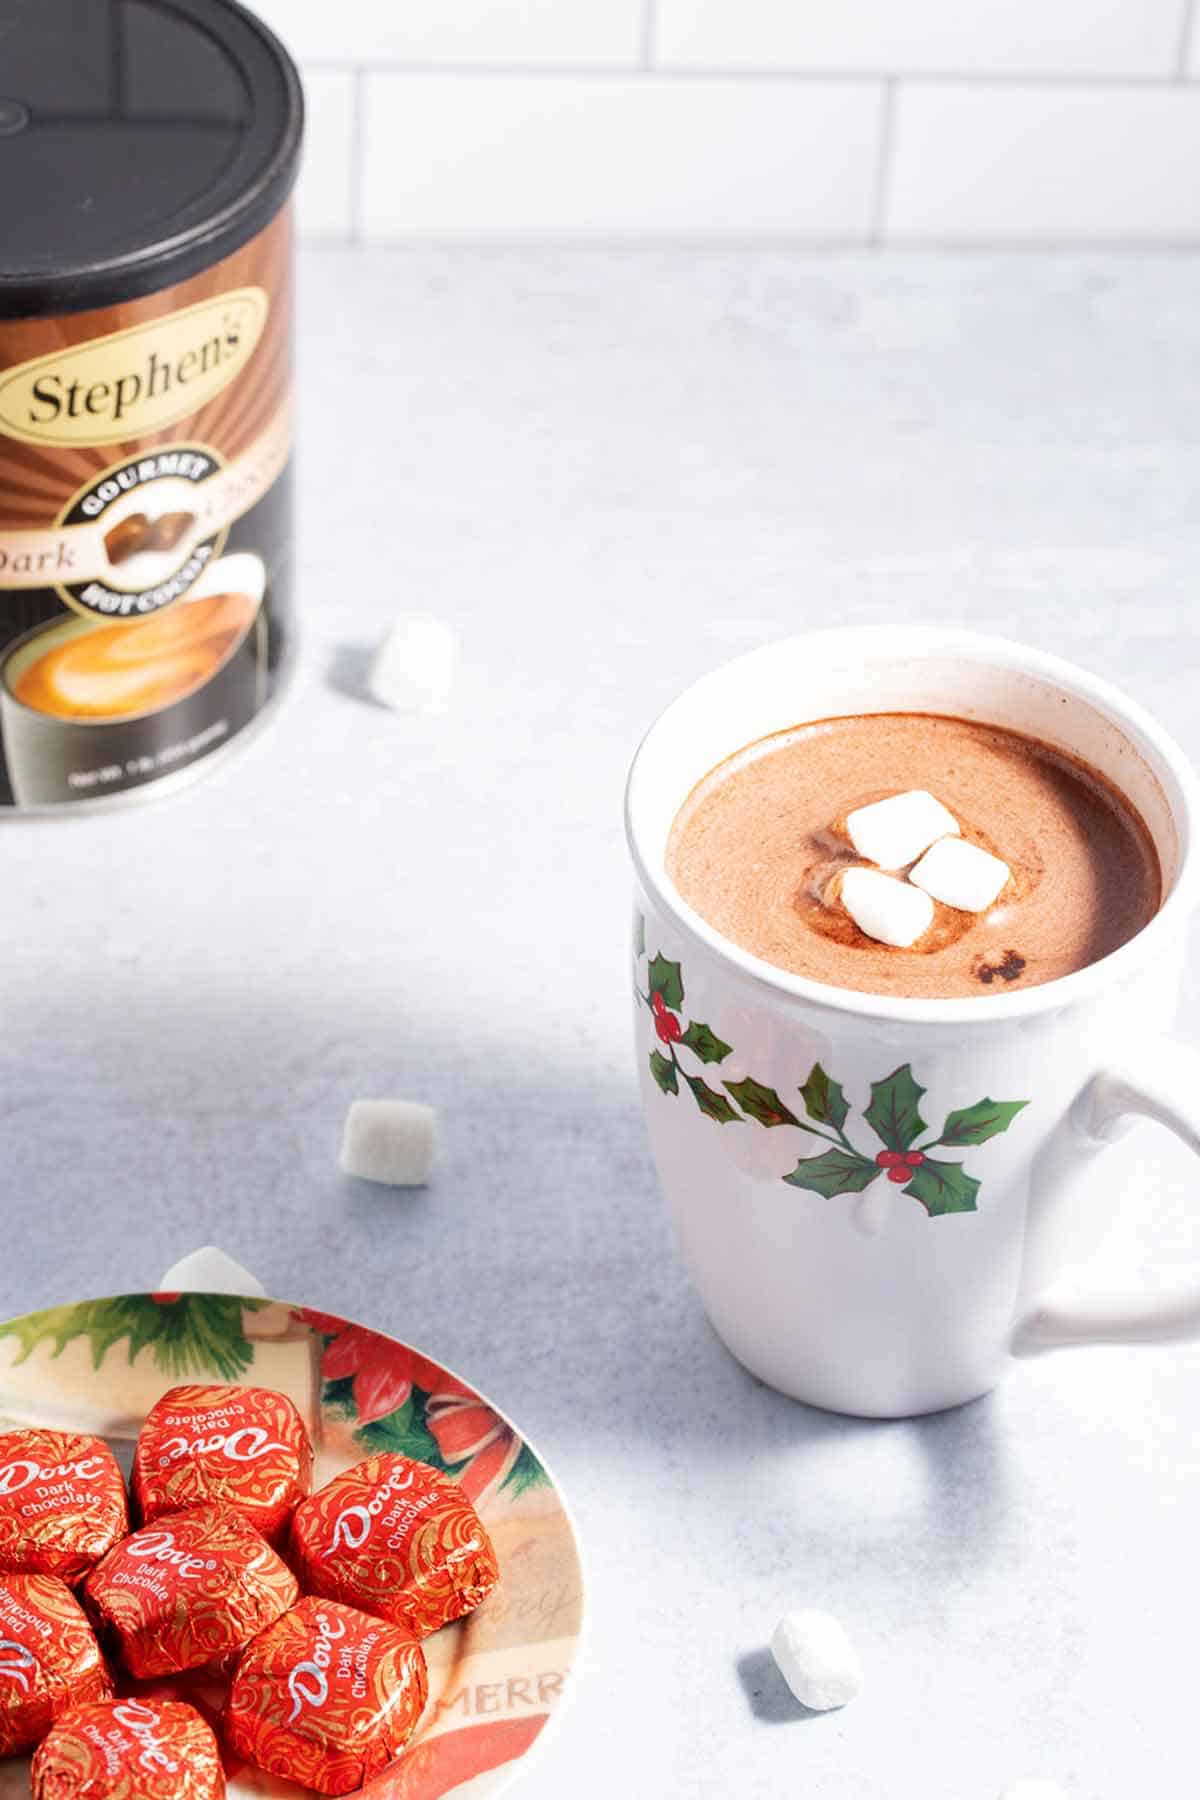 Hot chocolate with marshmallows next to a plate of chocolate candies.